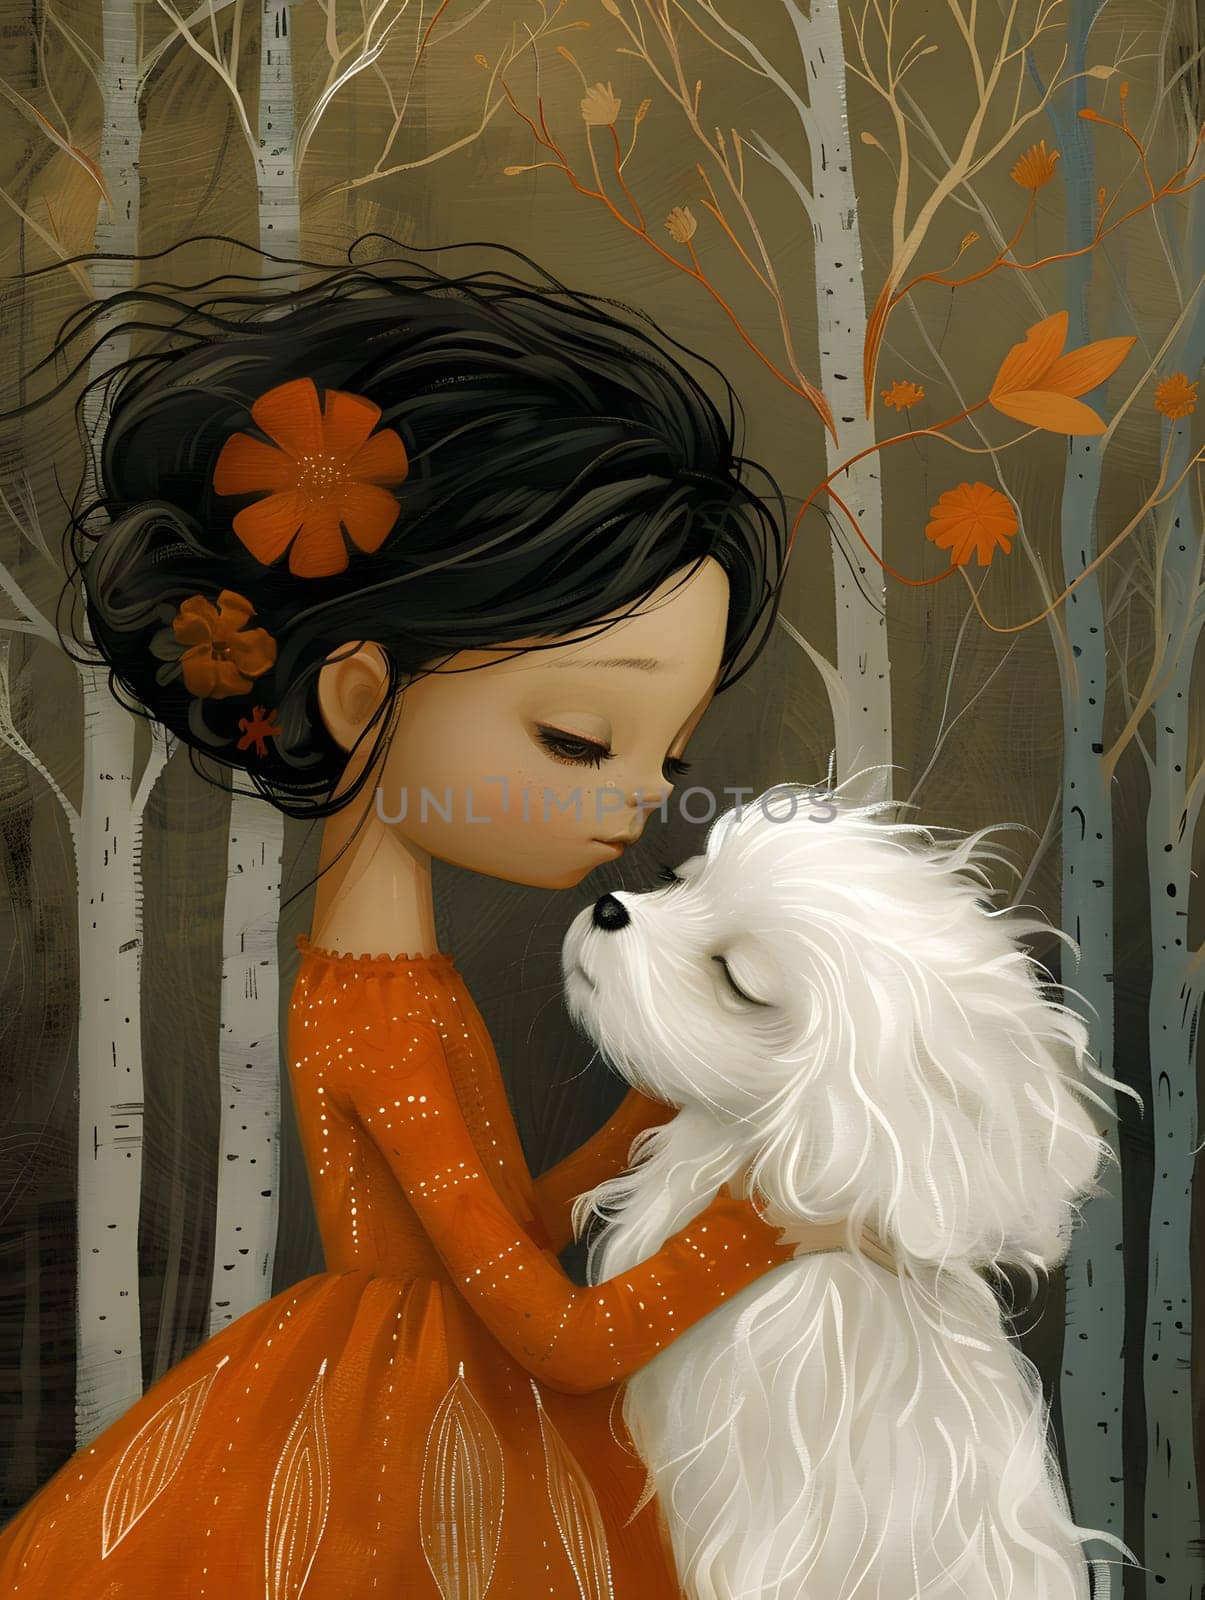 A girl with black hair is embracing a white dog while holding a flower toy. She looks like a doll with eyelash extensions and an orange dress with a fawn print, creating a beautiful piece of art